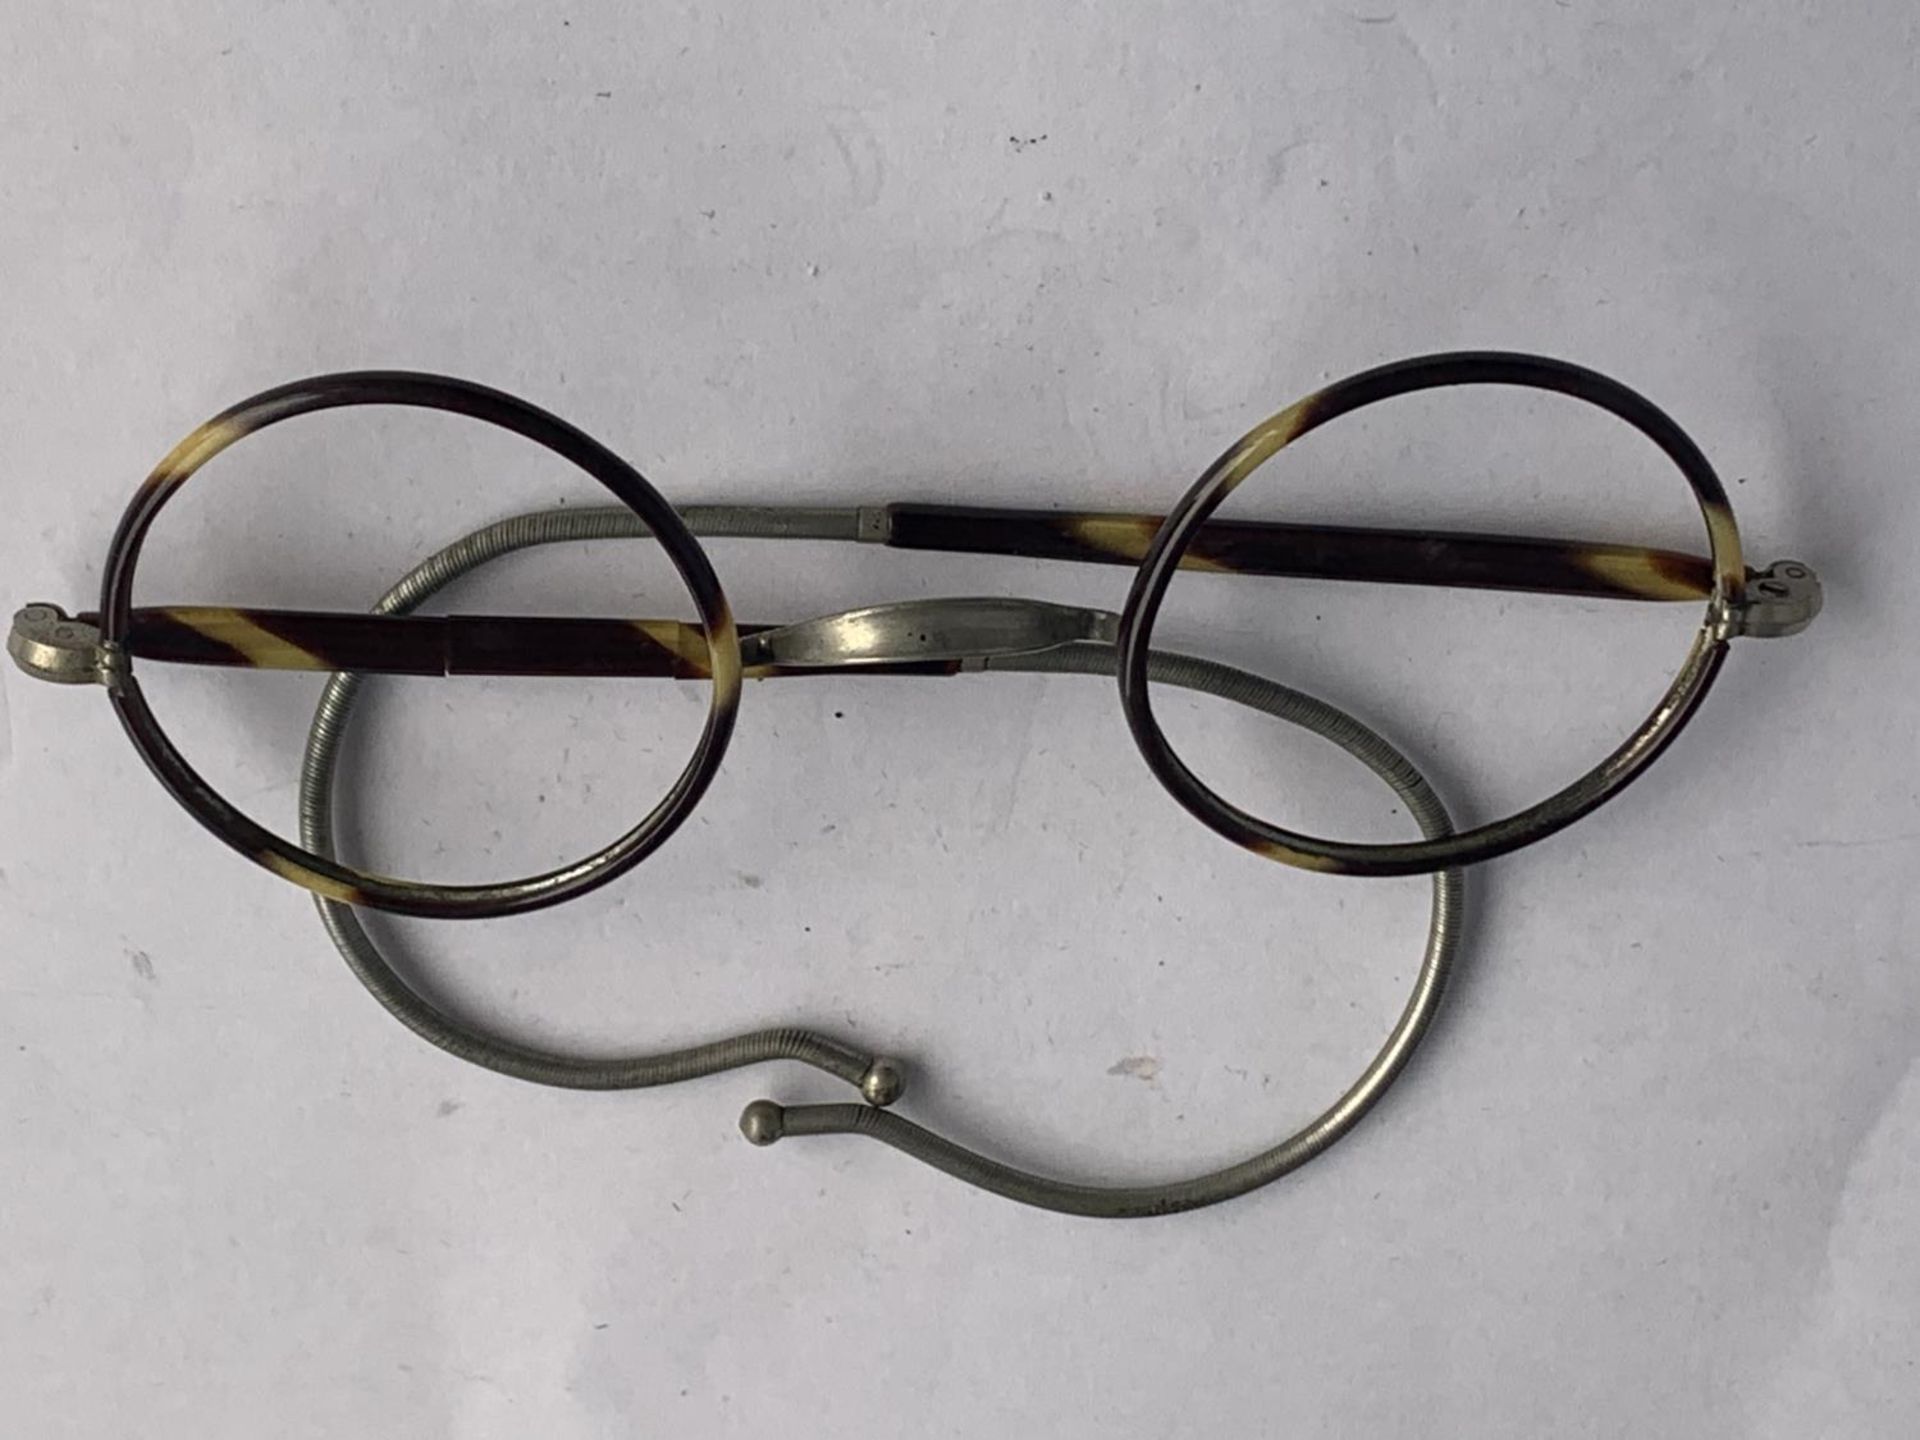 A VINTAGE PAIR OF TORTOISE SHELL SPECTACLES